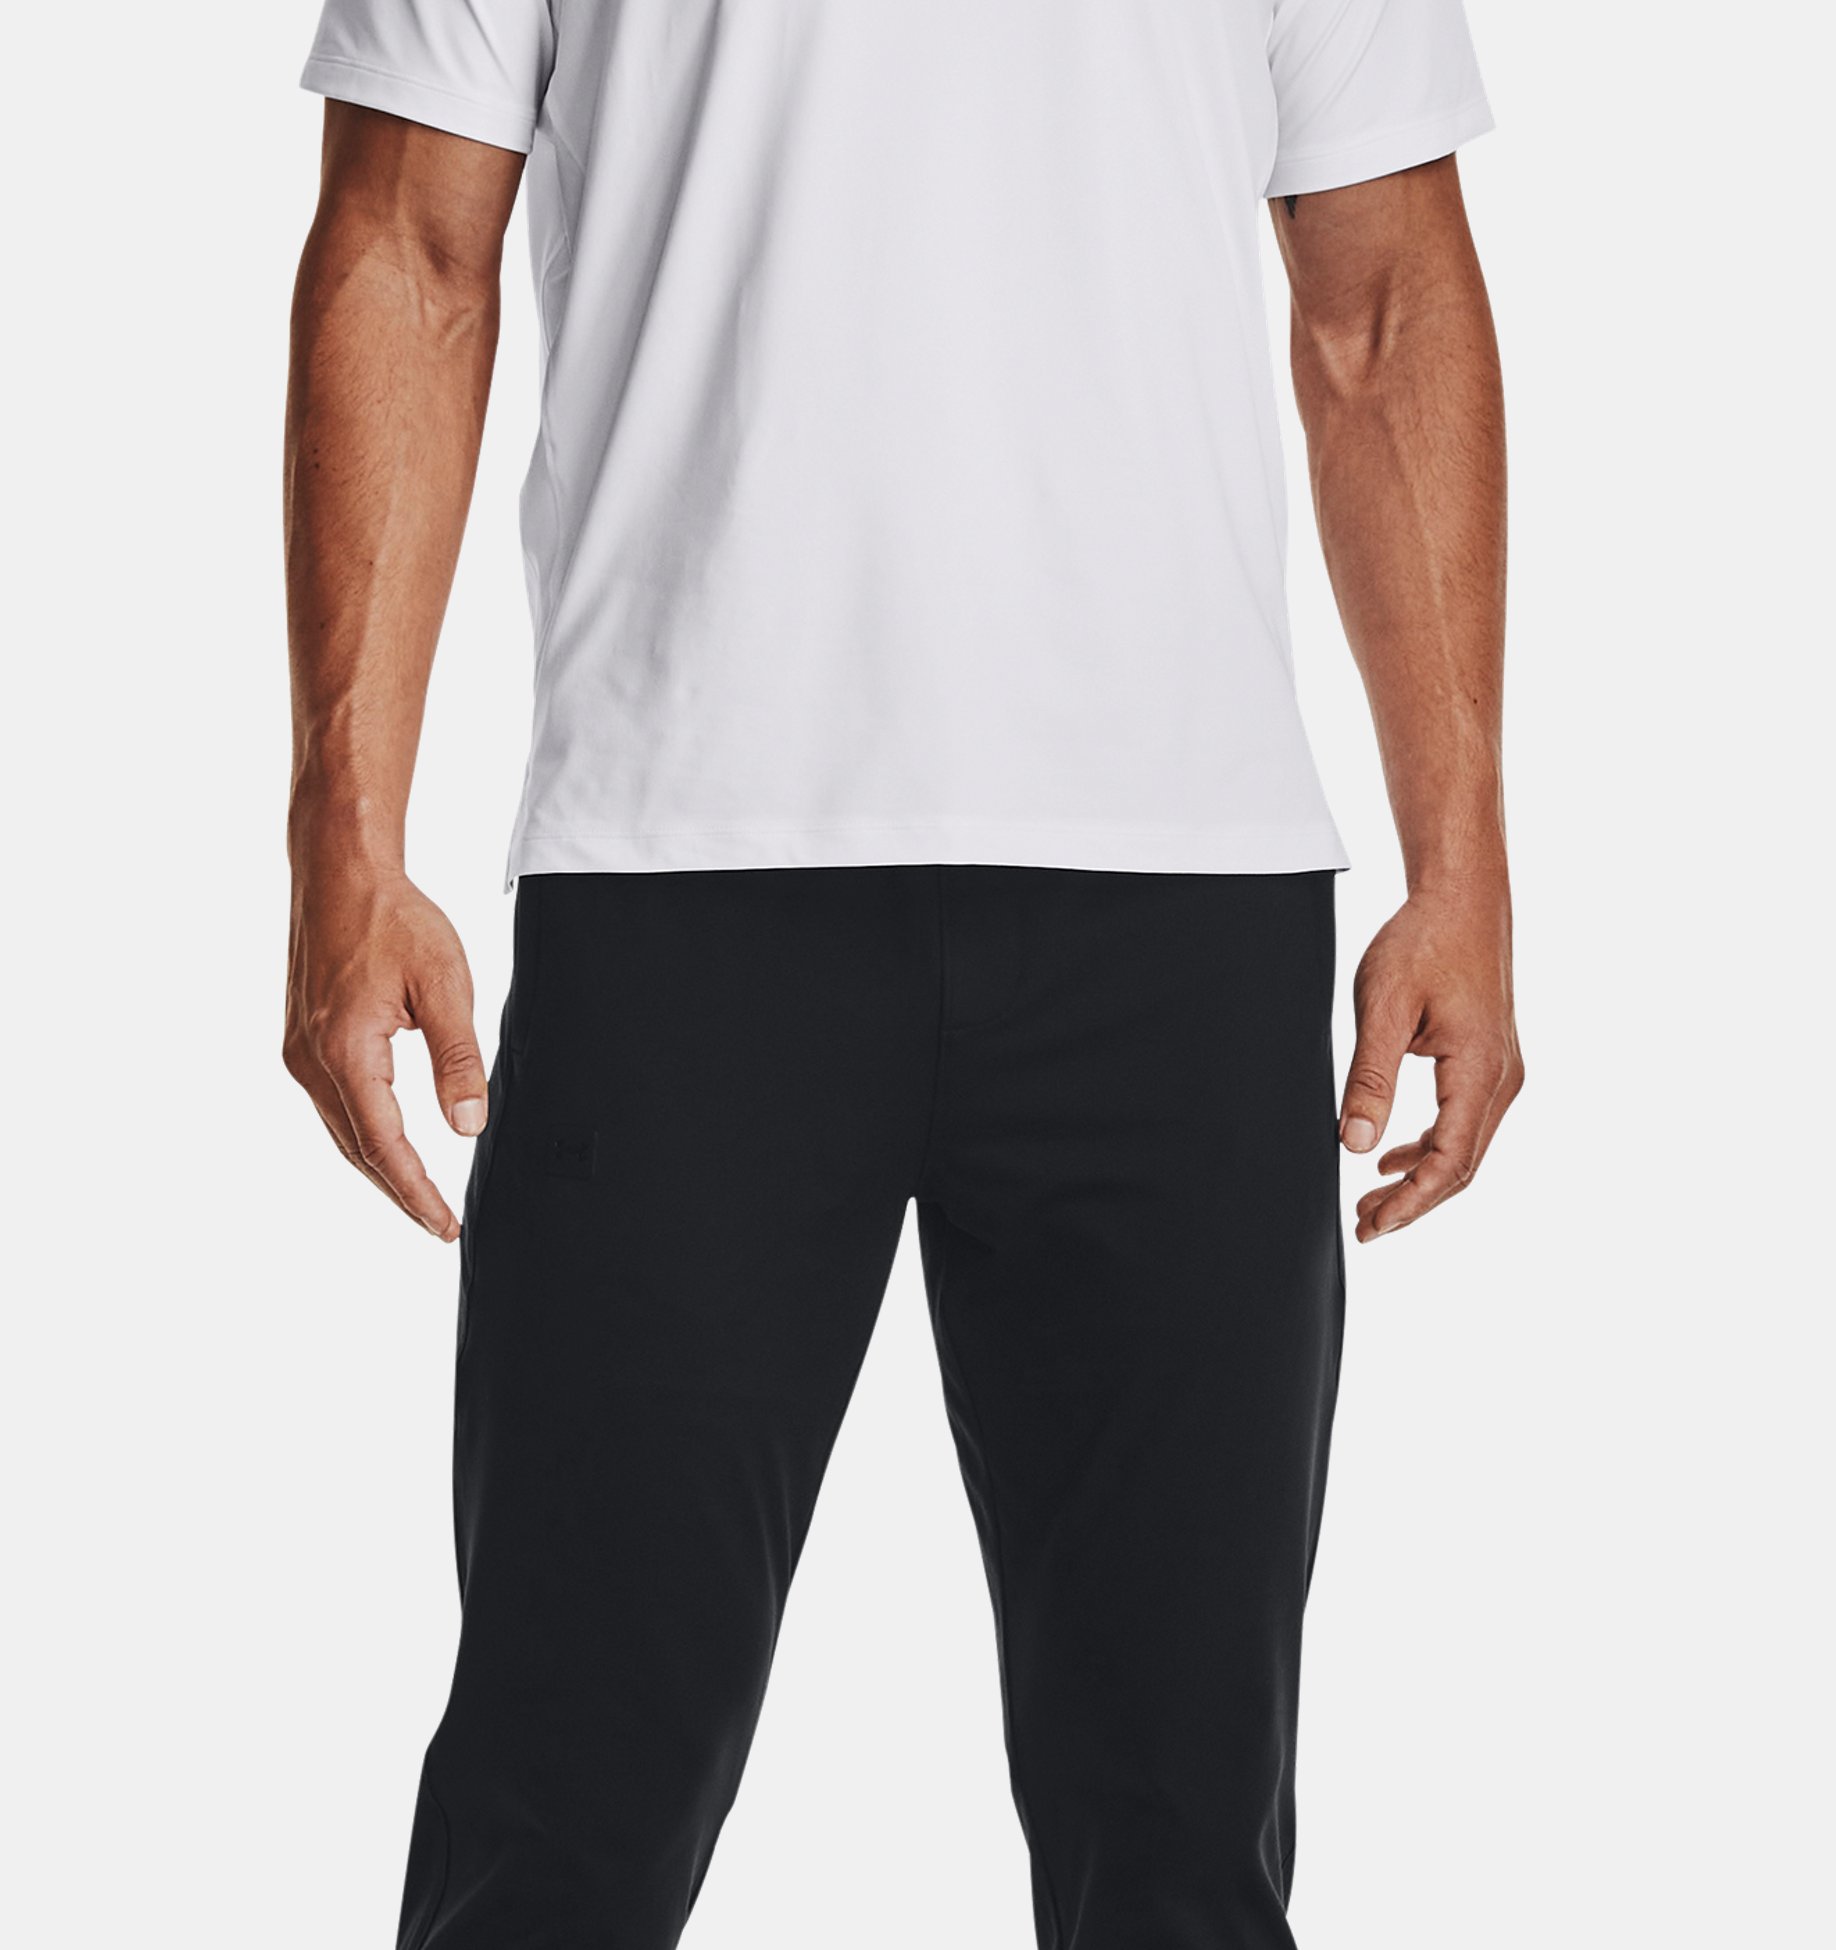 Under Armour Meridian Tapered Pants Fresh Clay 1373730-176 - Free Shipping  at LASC